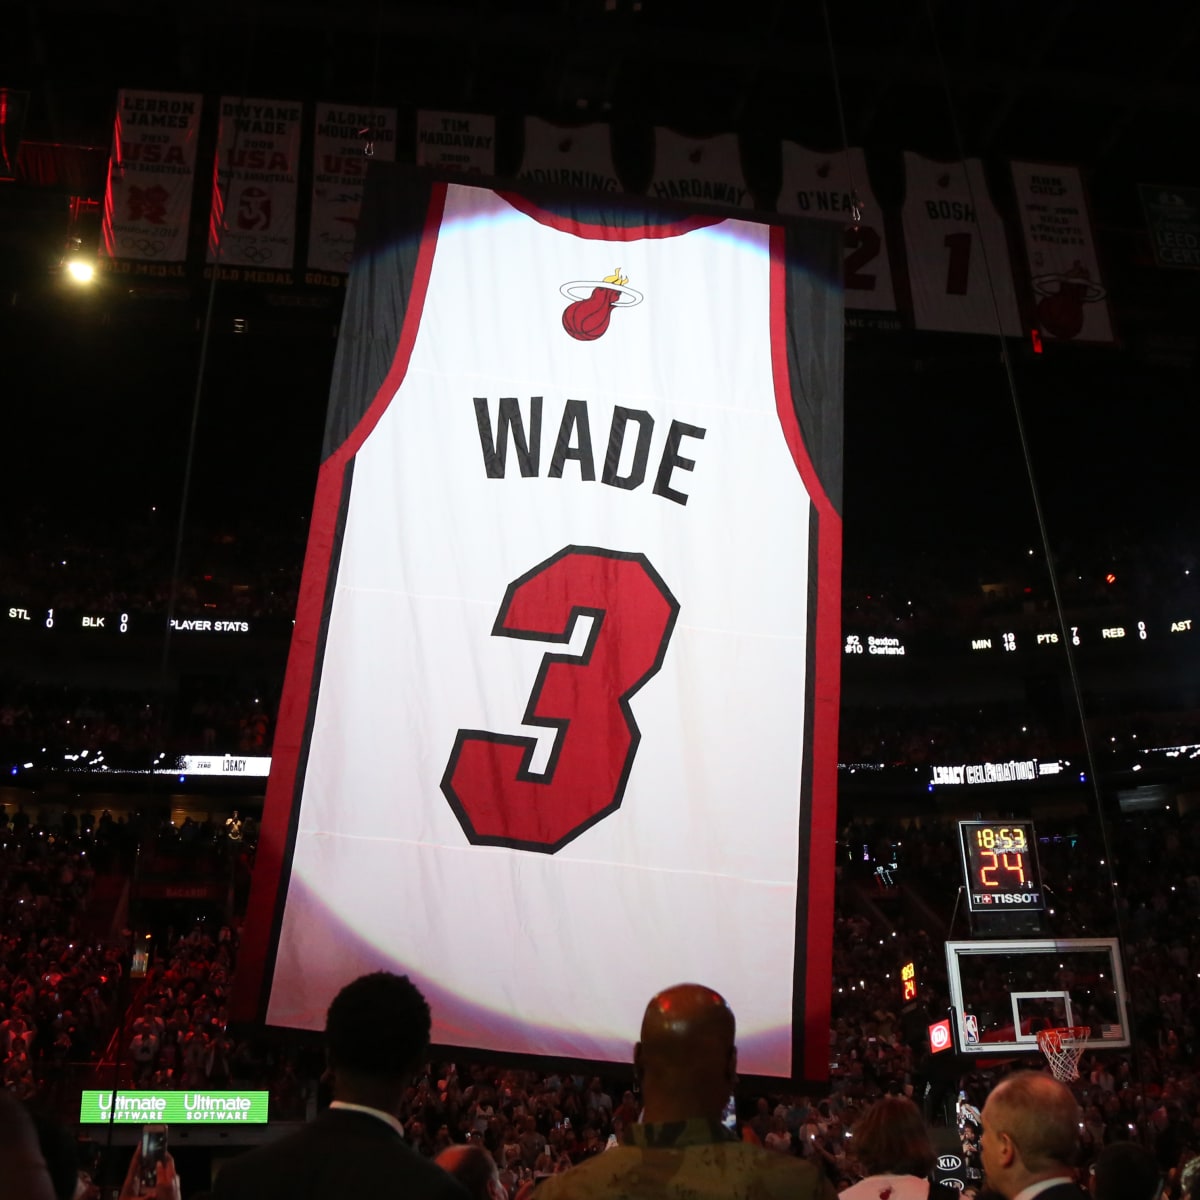 How many teams in the NBA have retired number 23?